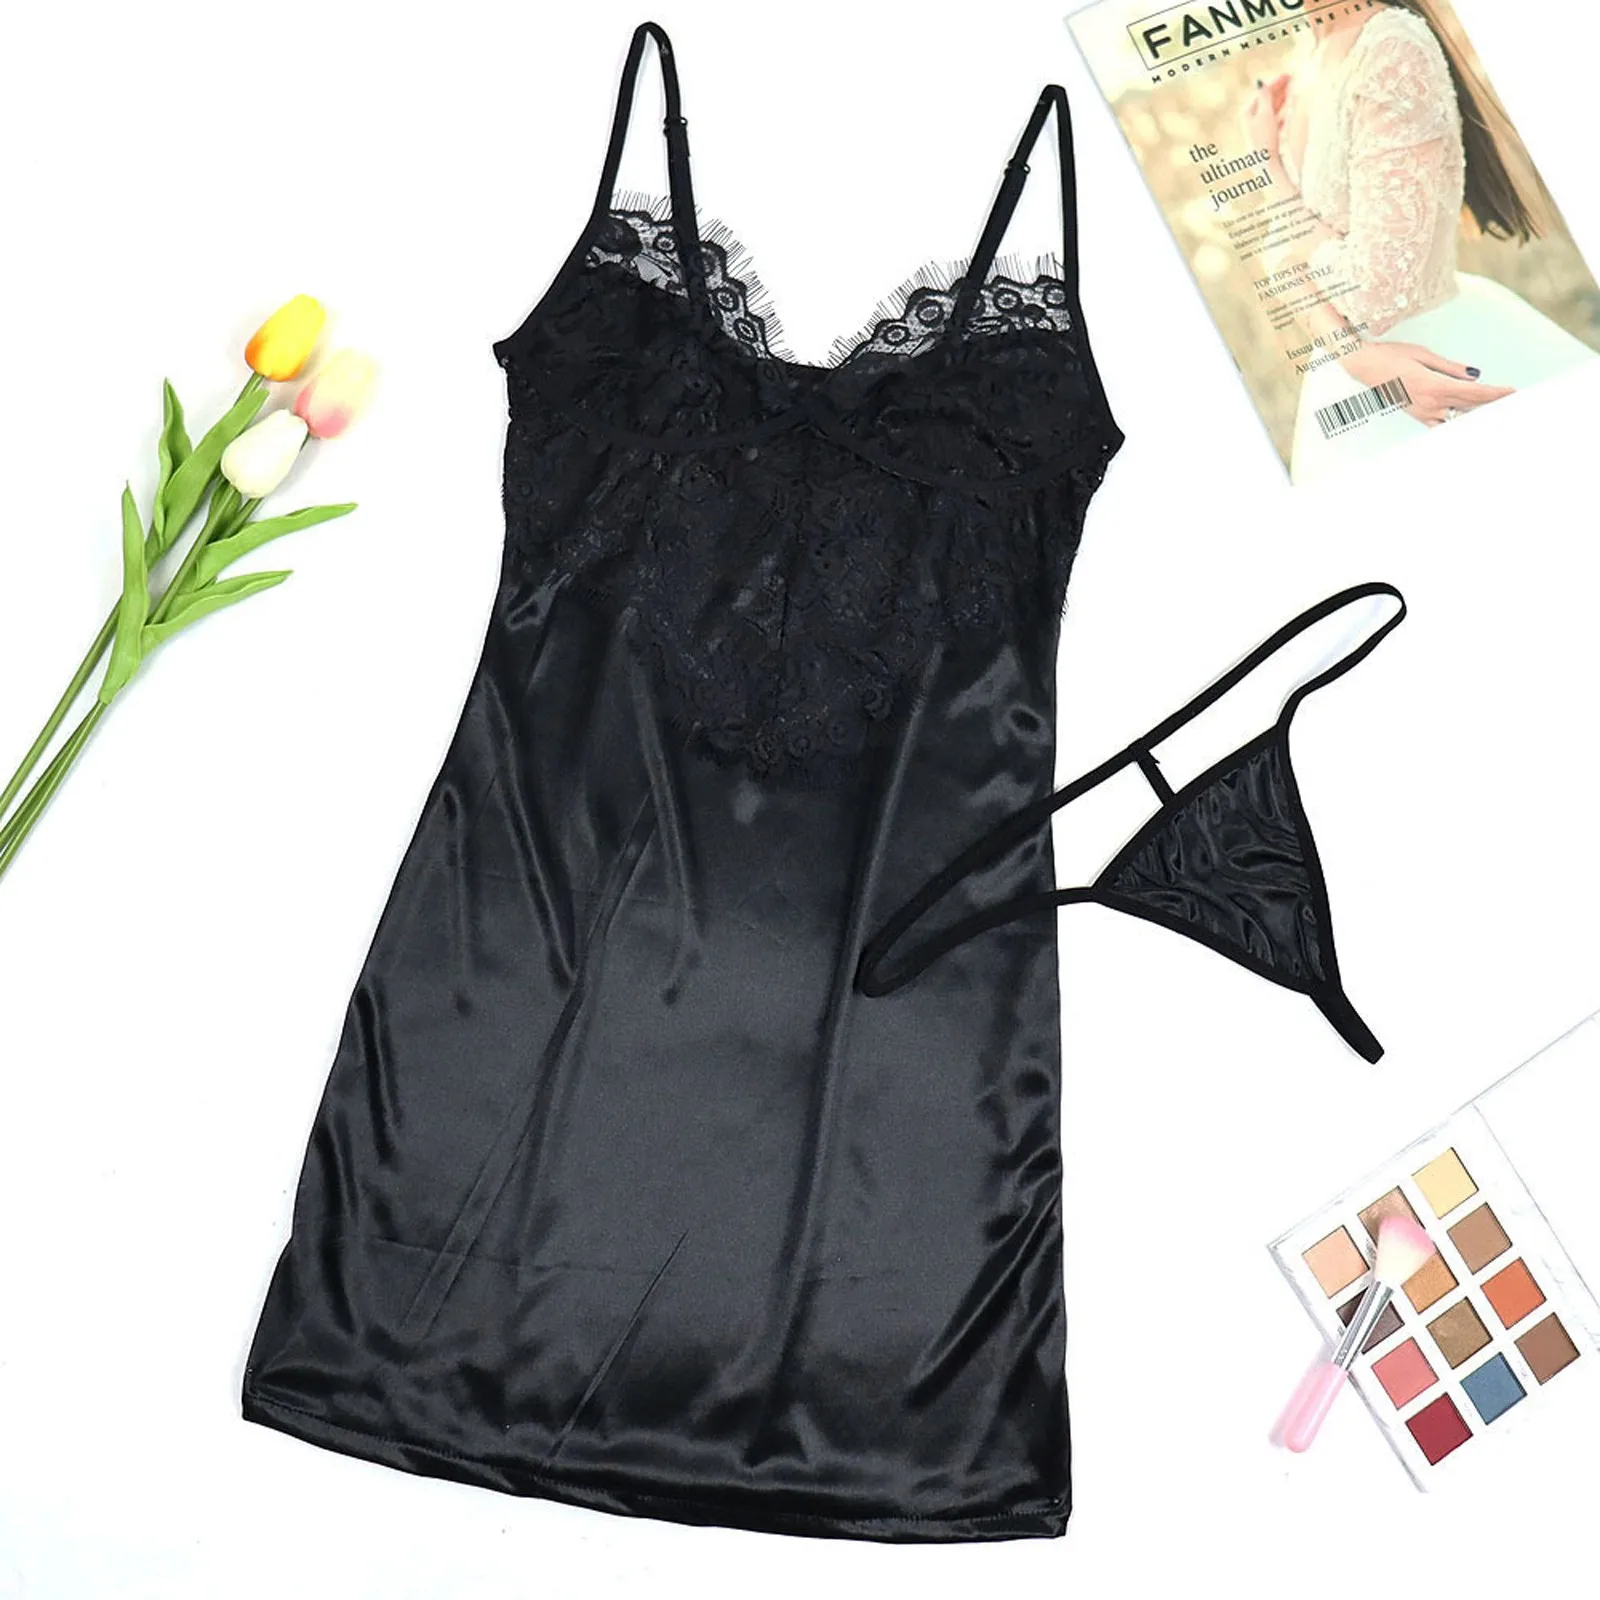 

Women's underwear Sexy Lace Black Lingerie Thong Set Ladies Casual Sleepwear Nightdress Backless Pajamas нижнее беле женское